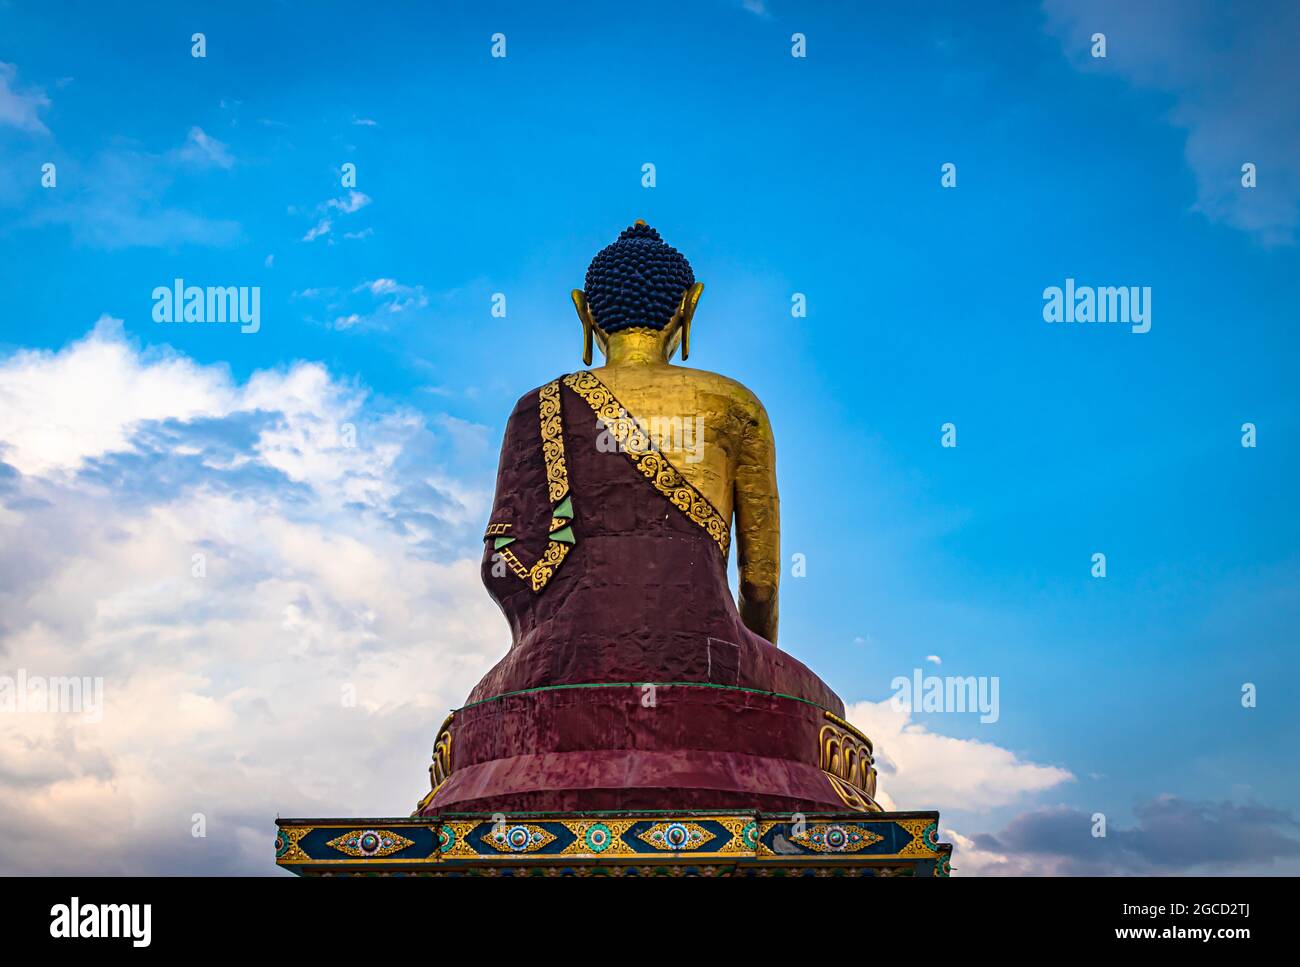 huge buddha golden statue from different perspective with bright blue sky at evening image is taken at giant buddha statue tawang arunachal pradesh in Stock Photo